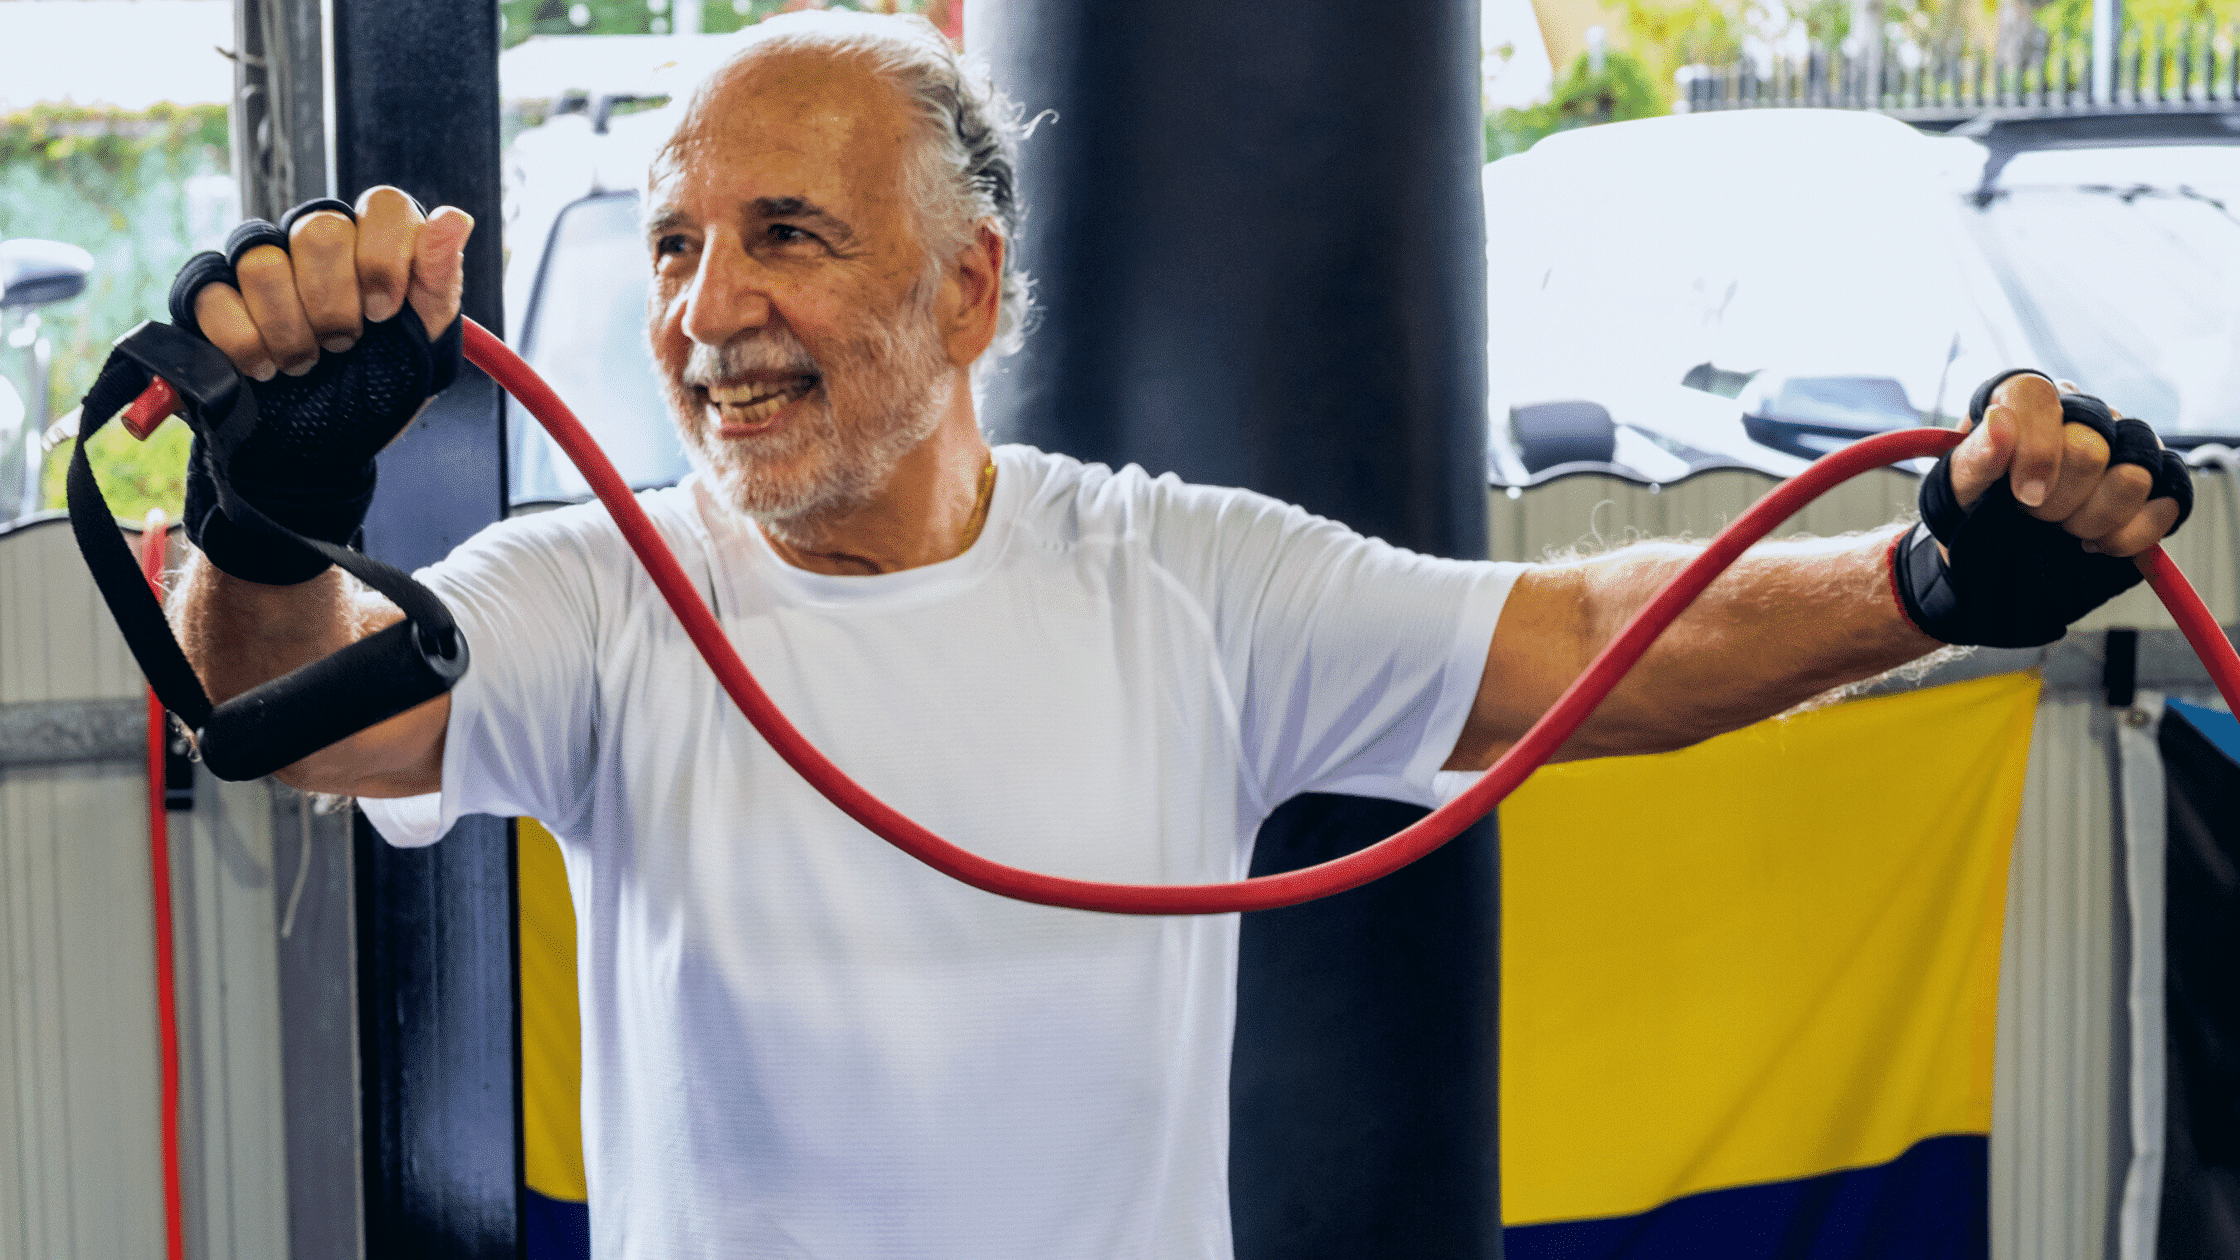 Ageless Workout Tribe Member doing strength exercise